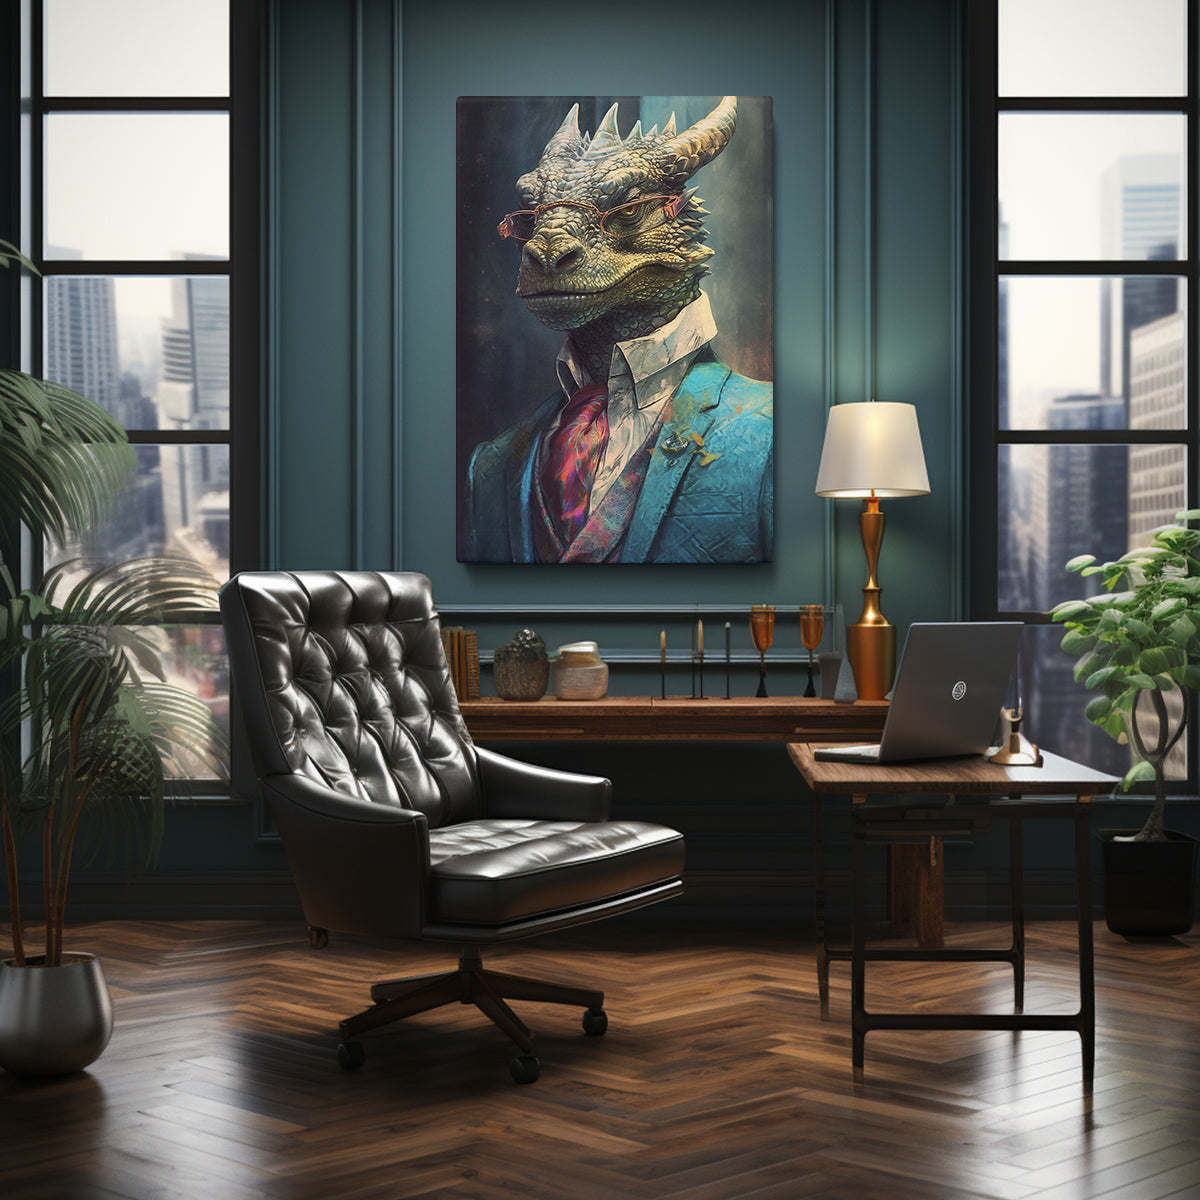 Scholarly Dragon in Glasses Canvas Print ArtLexy 1 Panel 16"x24" inches 